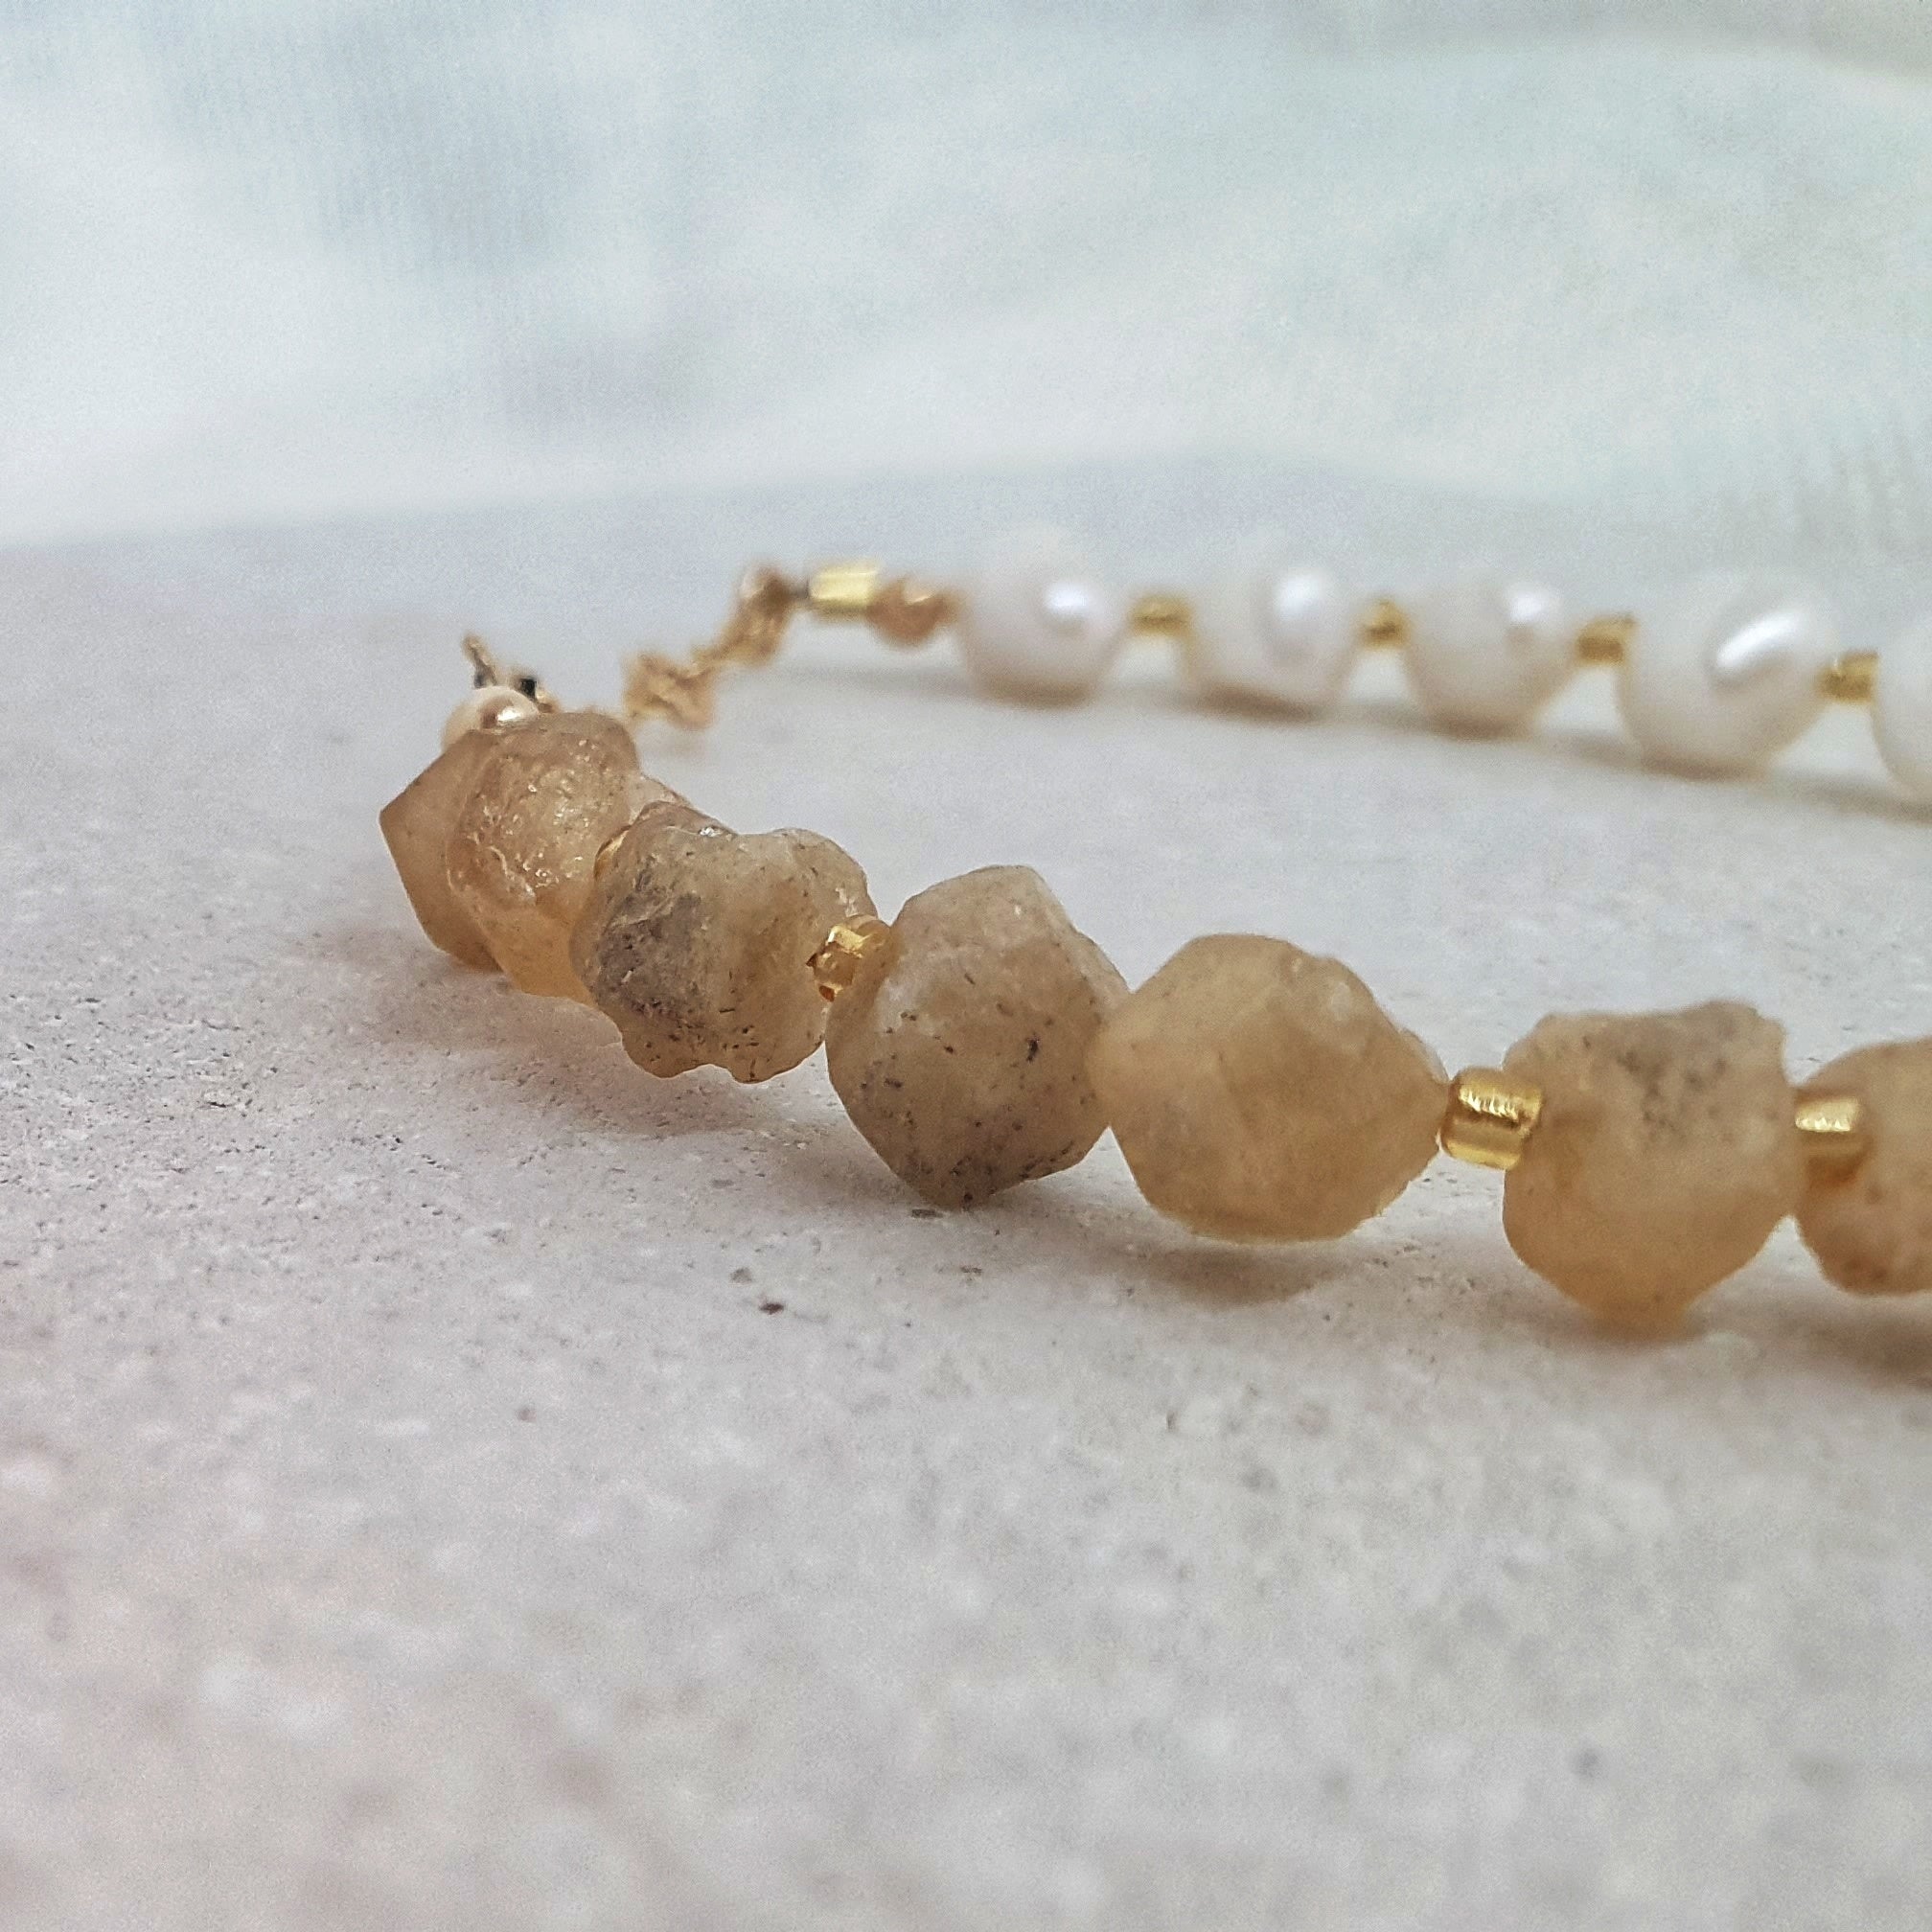 Designed with freshwater pearls, yellow garnet chips, glass seed beads and 14Kt gold-filled beads. The centrepiece to our first collection, Bossy is a chunkier statement piece yet still maintains a delicate feminine feel.